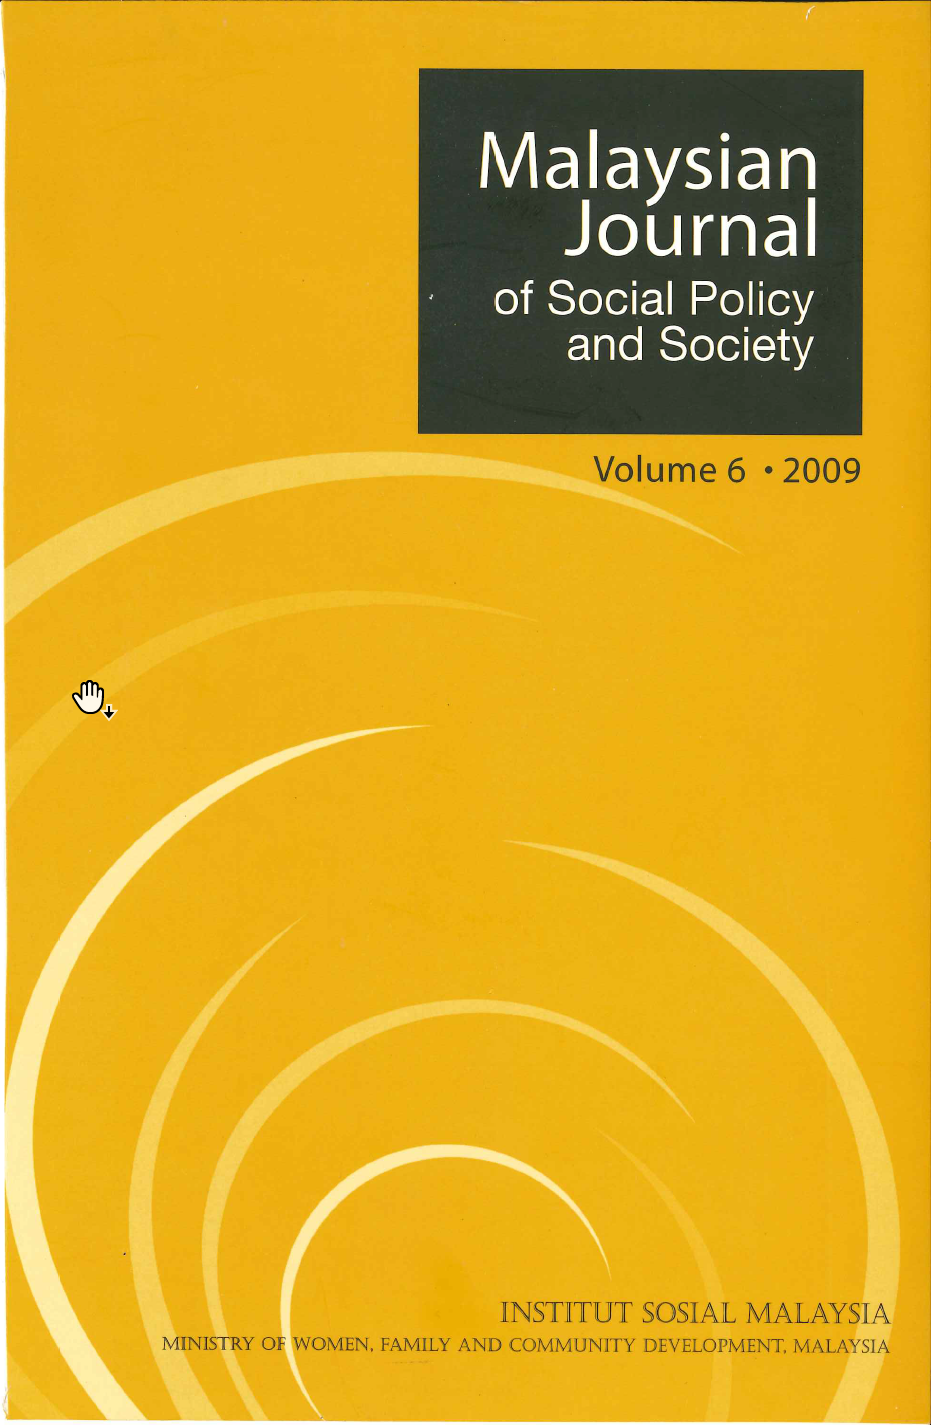 					View Vol. 6 (2009): Malaysian Journal of Social Policy and Society Volume 6 2009
				